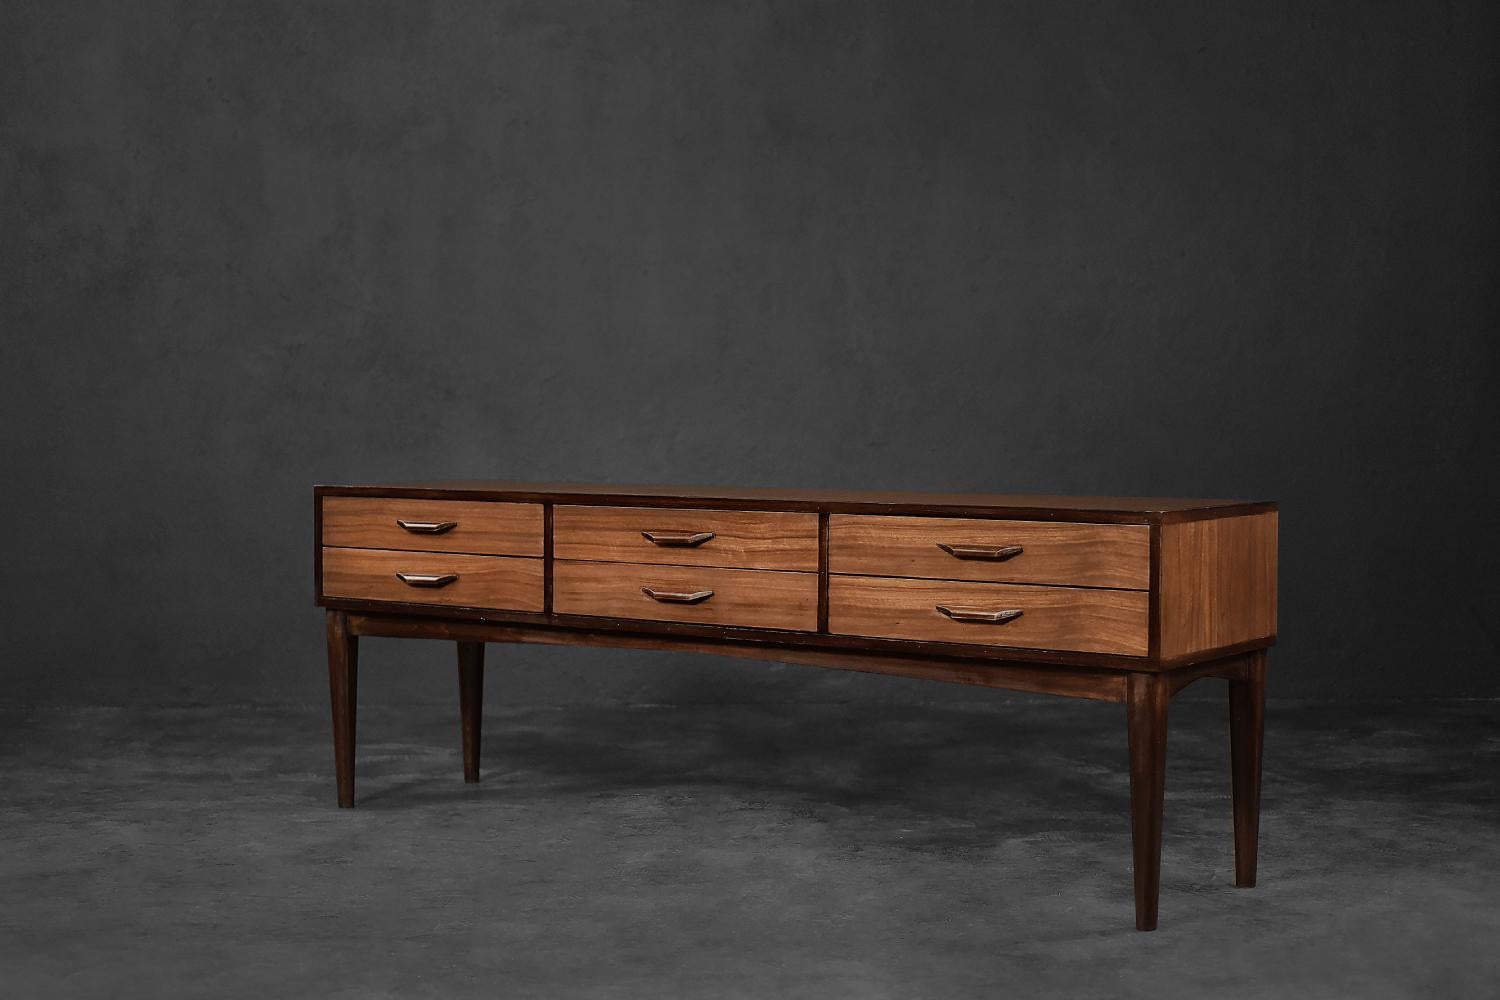 This classic sideboard was made in Denmark during the 1970s. It is made of an extremely interesting and rare wood, which is mahogany okoume from Equatorial Africa, which is characterized by a slightly pink shade of brown. Due to its exceptional